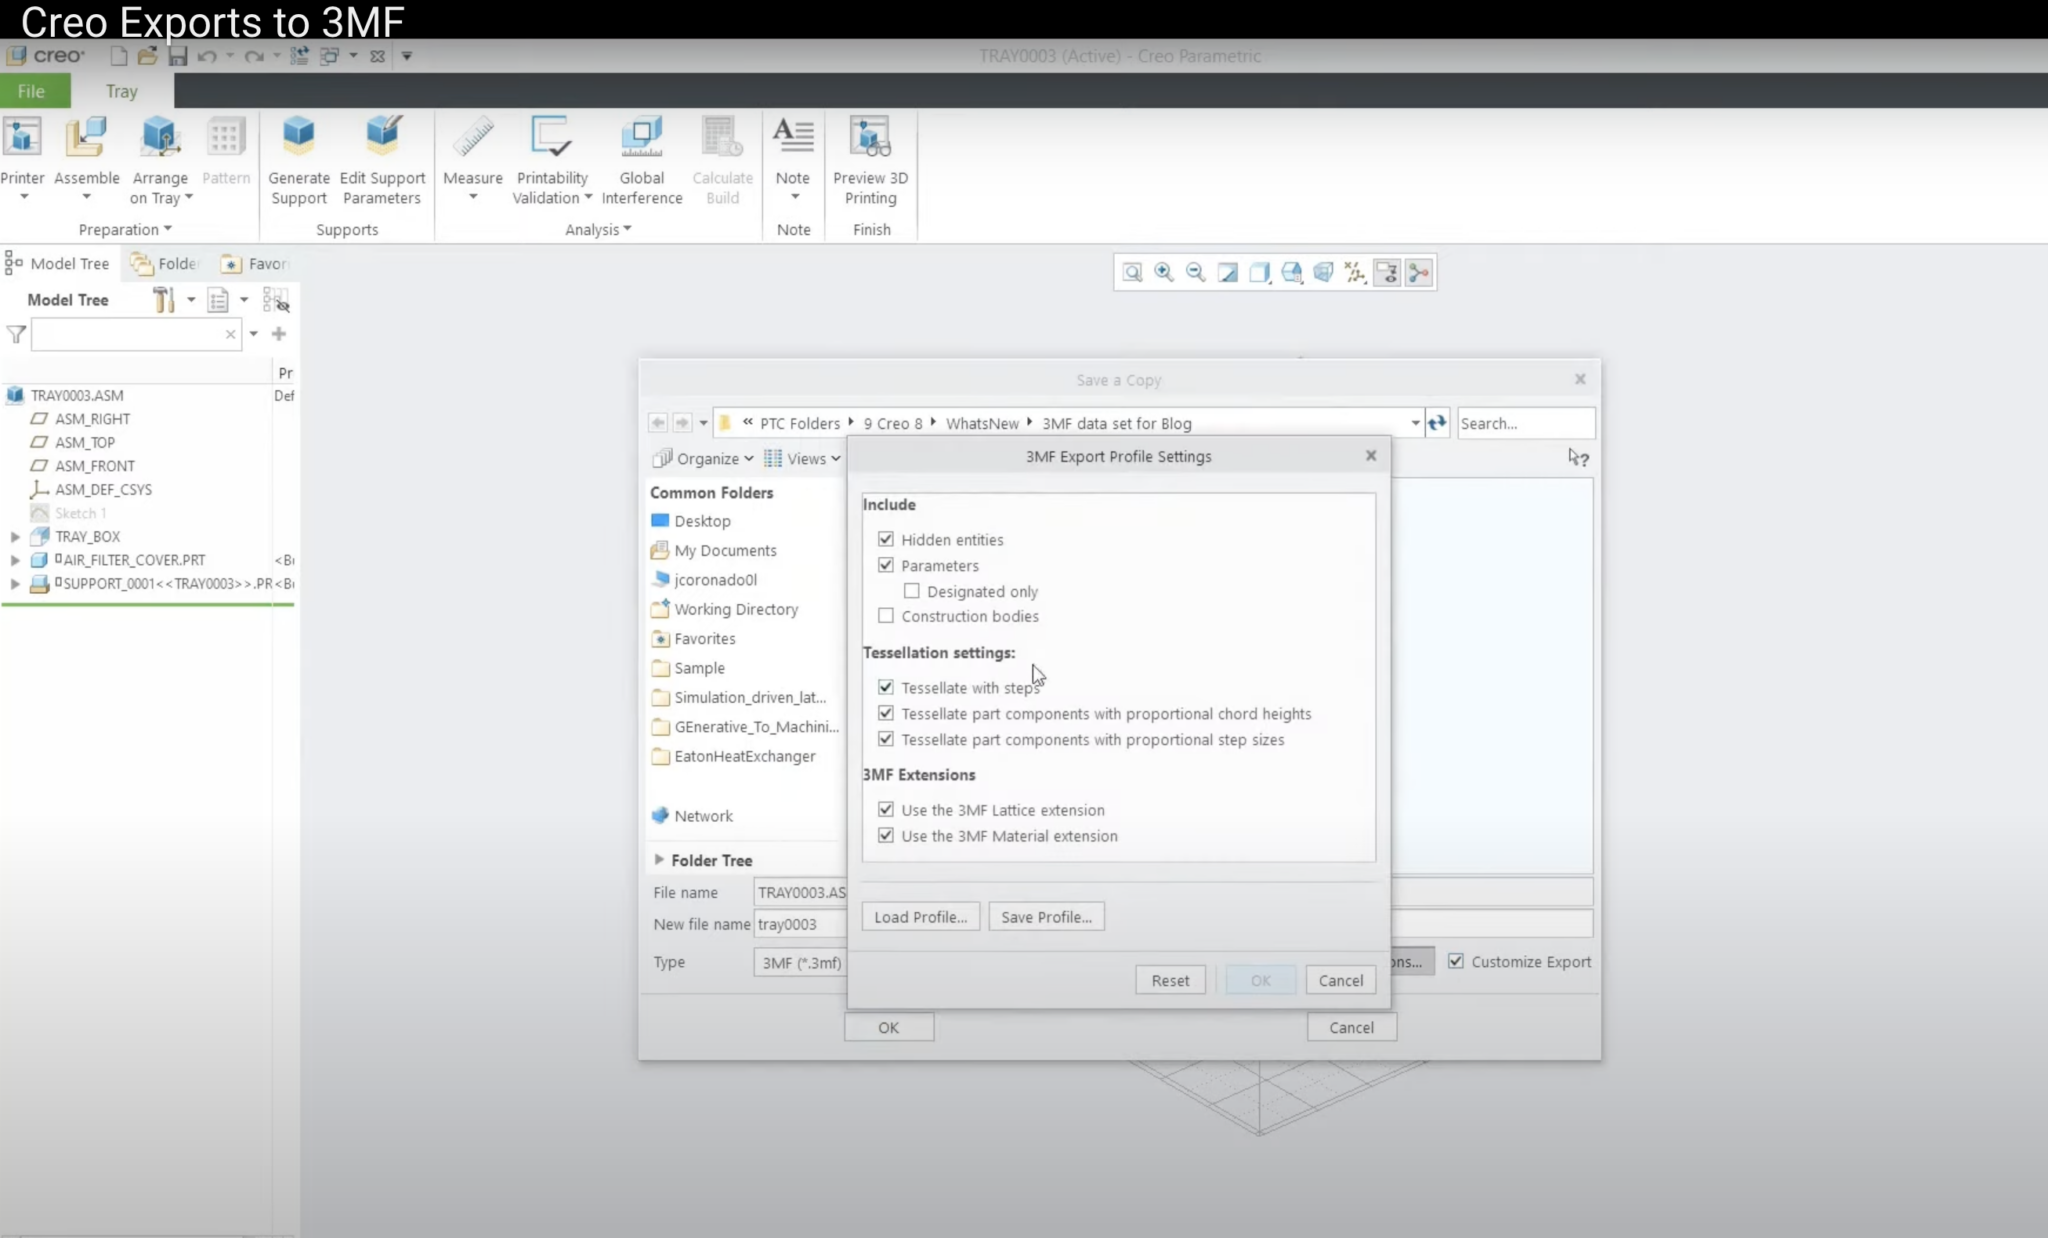 How to Export 3MF from PTC Creo for 3D Printing (Video)